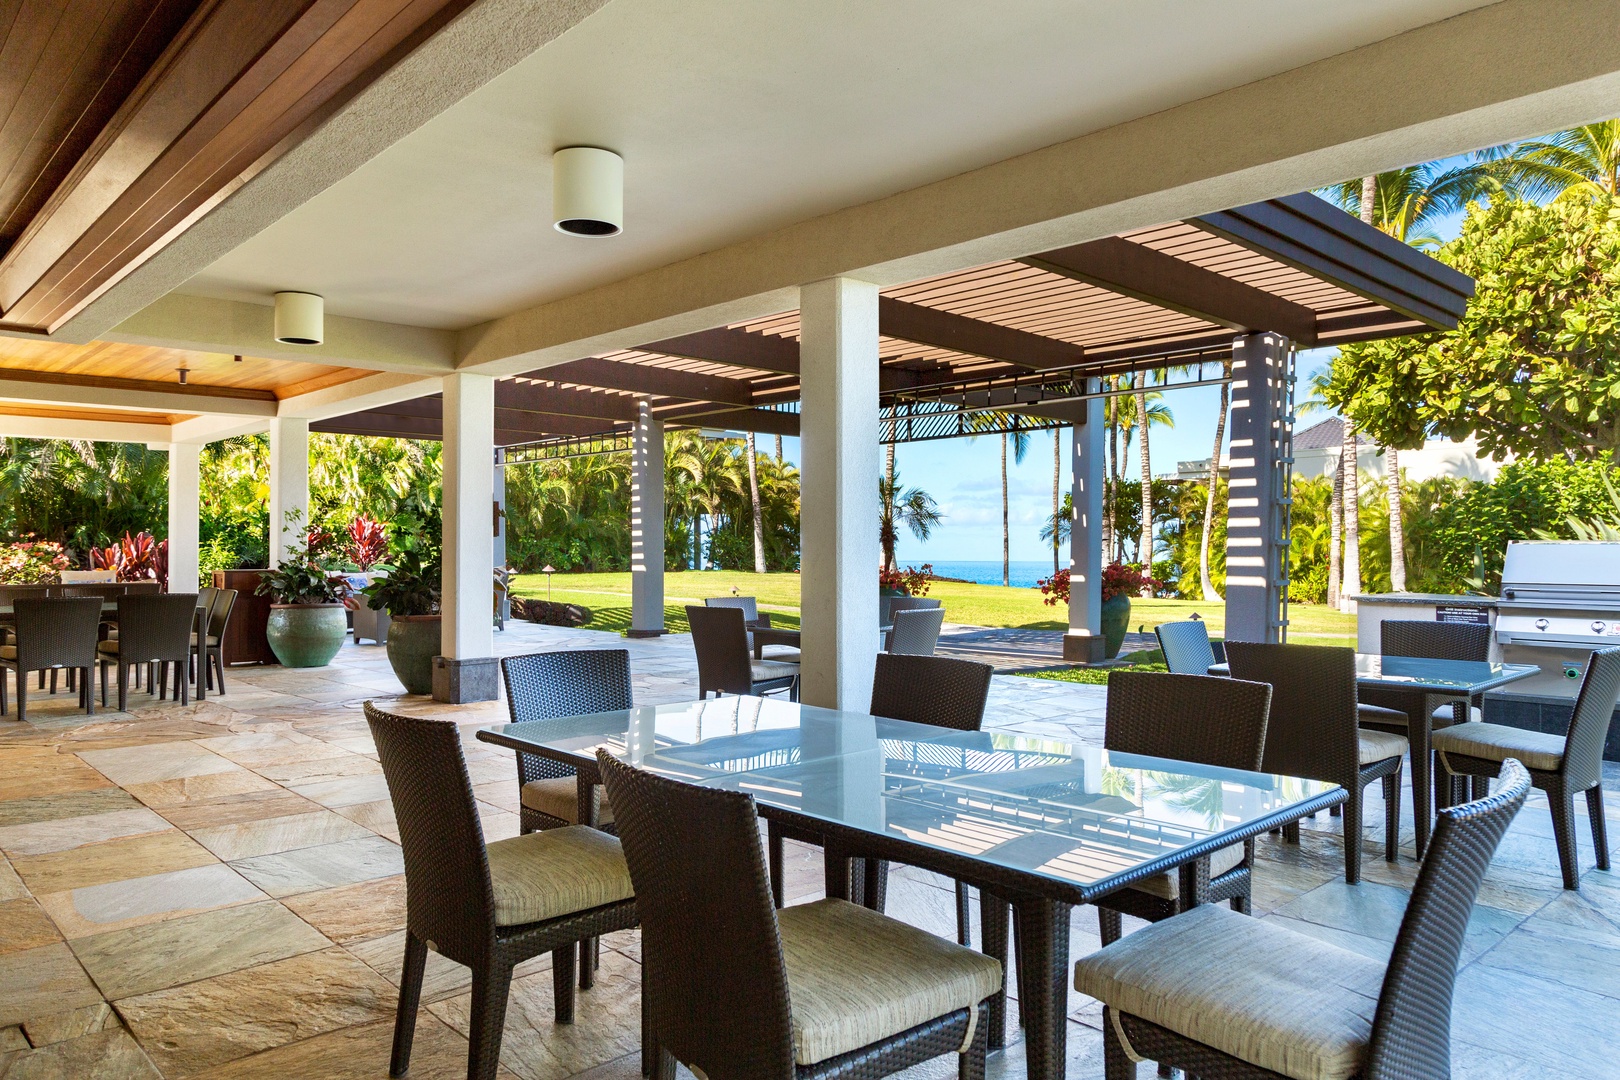 Kamuela Vacation Rentals, Mauna Lani Point E105 - Plenty of seating at the clubhouse and beautiful views.